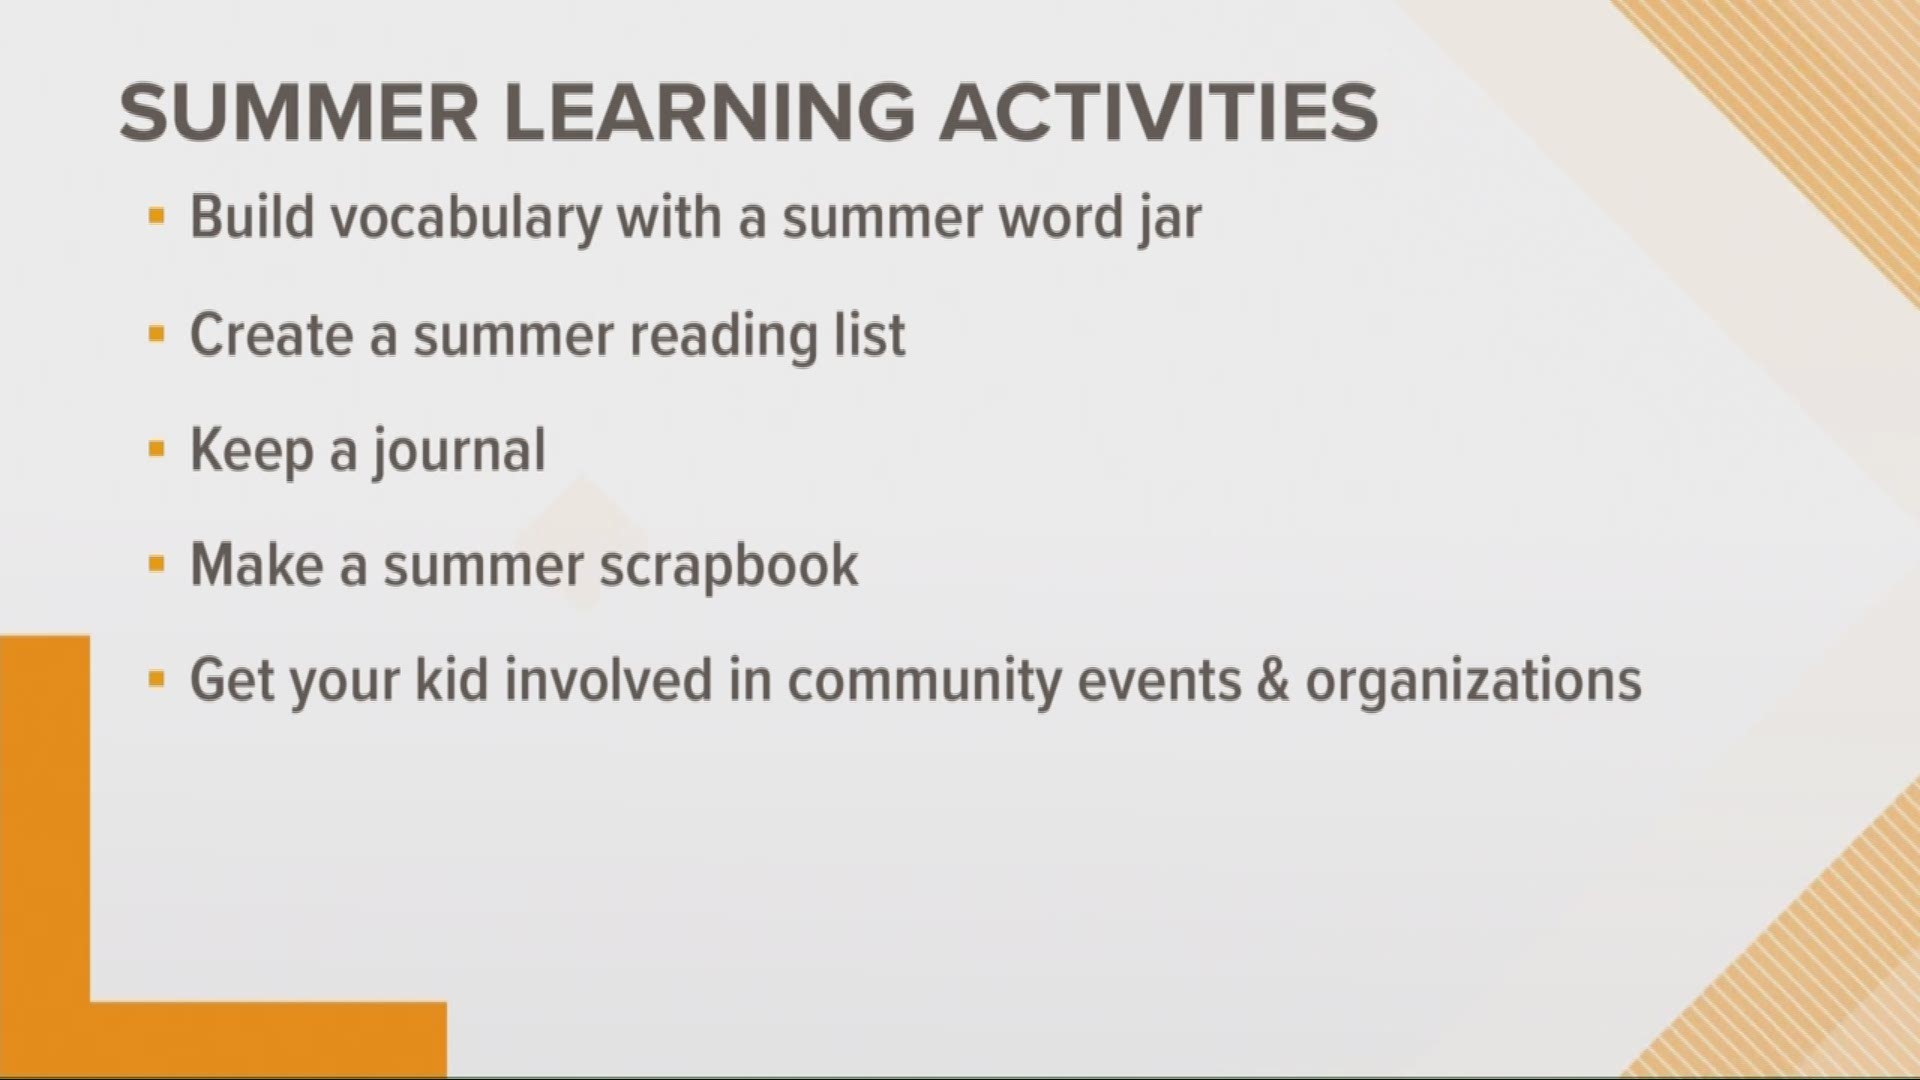 Monica Wolf, Franchisee/Center Director of Sylvan Learning of Elk Grove, talks about ways to help your children keep learning, even when they're out of school for the summer.